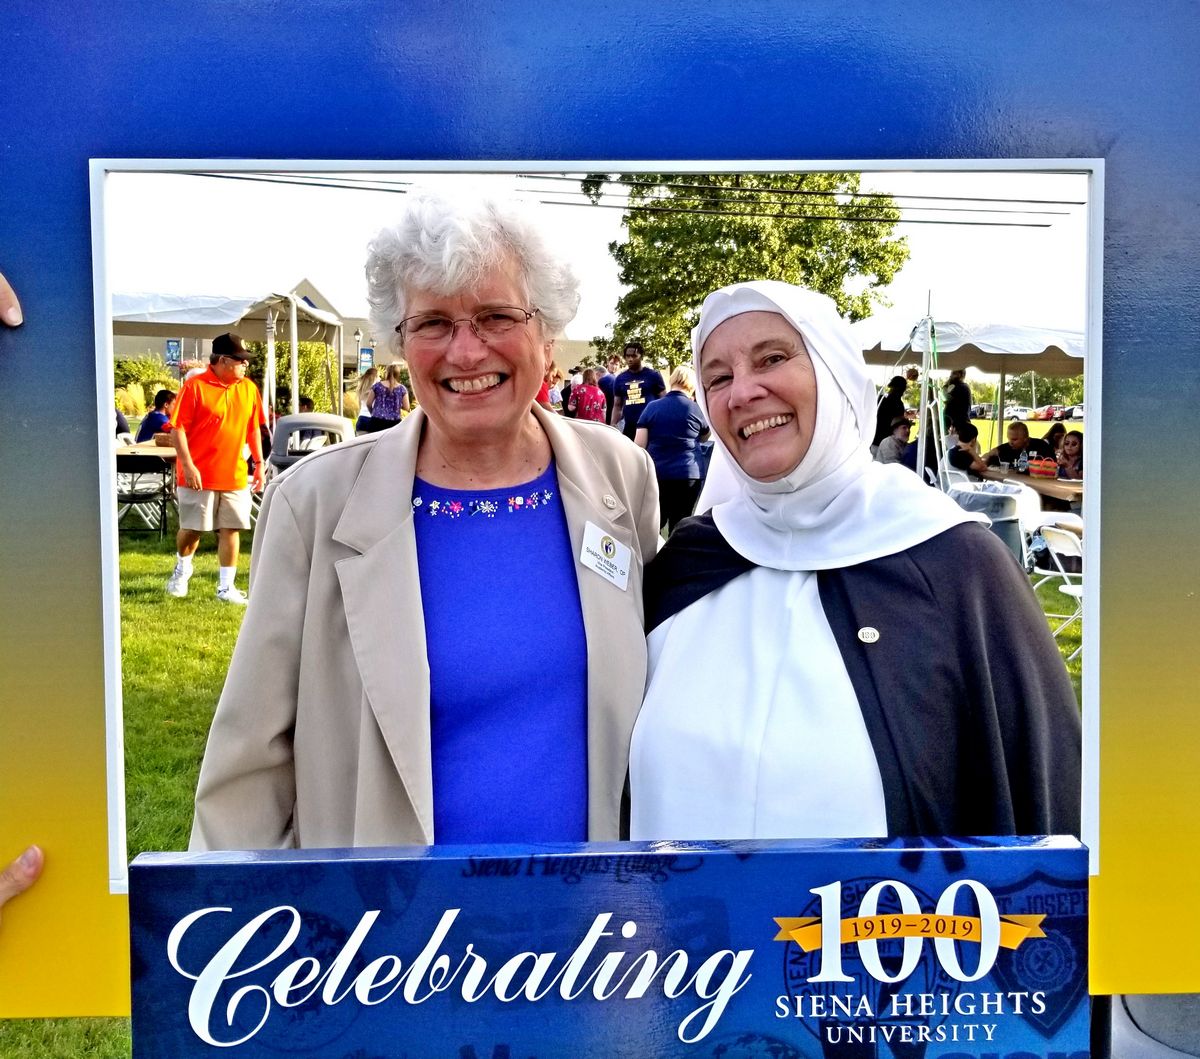 Sister Sharon poses with Sister Mary Poor at the Centennial Mall Dedication for SHU's 100th anniversary.